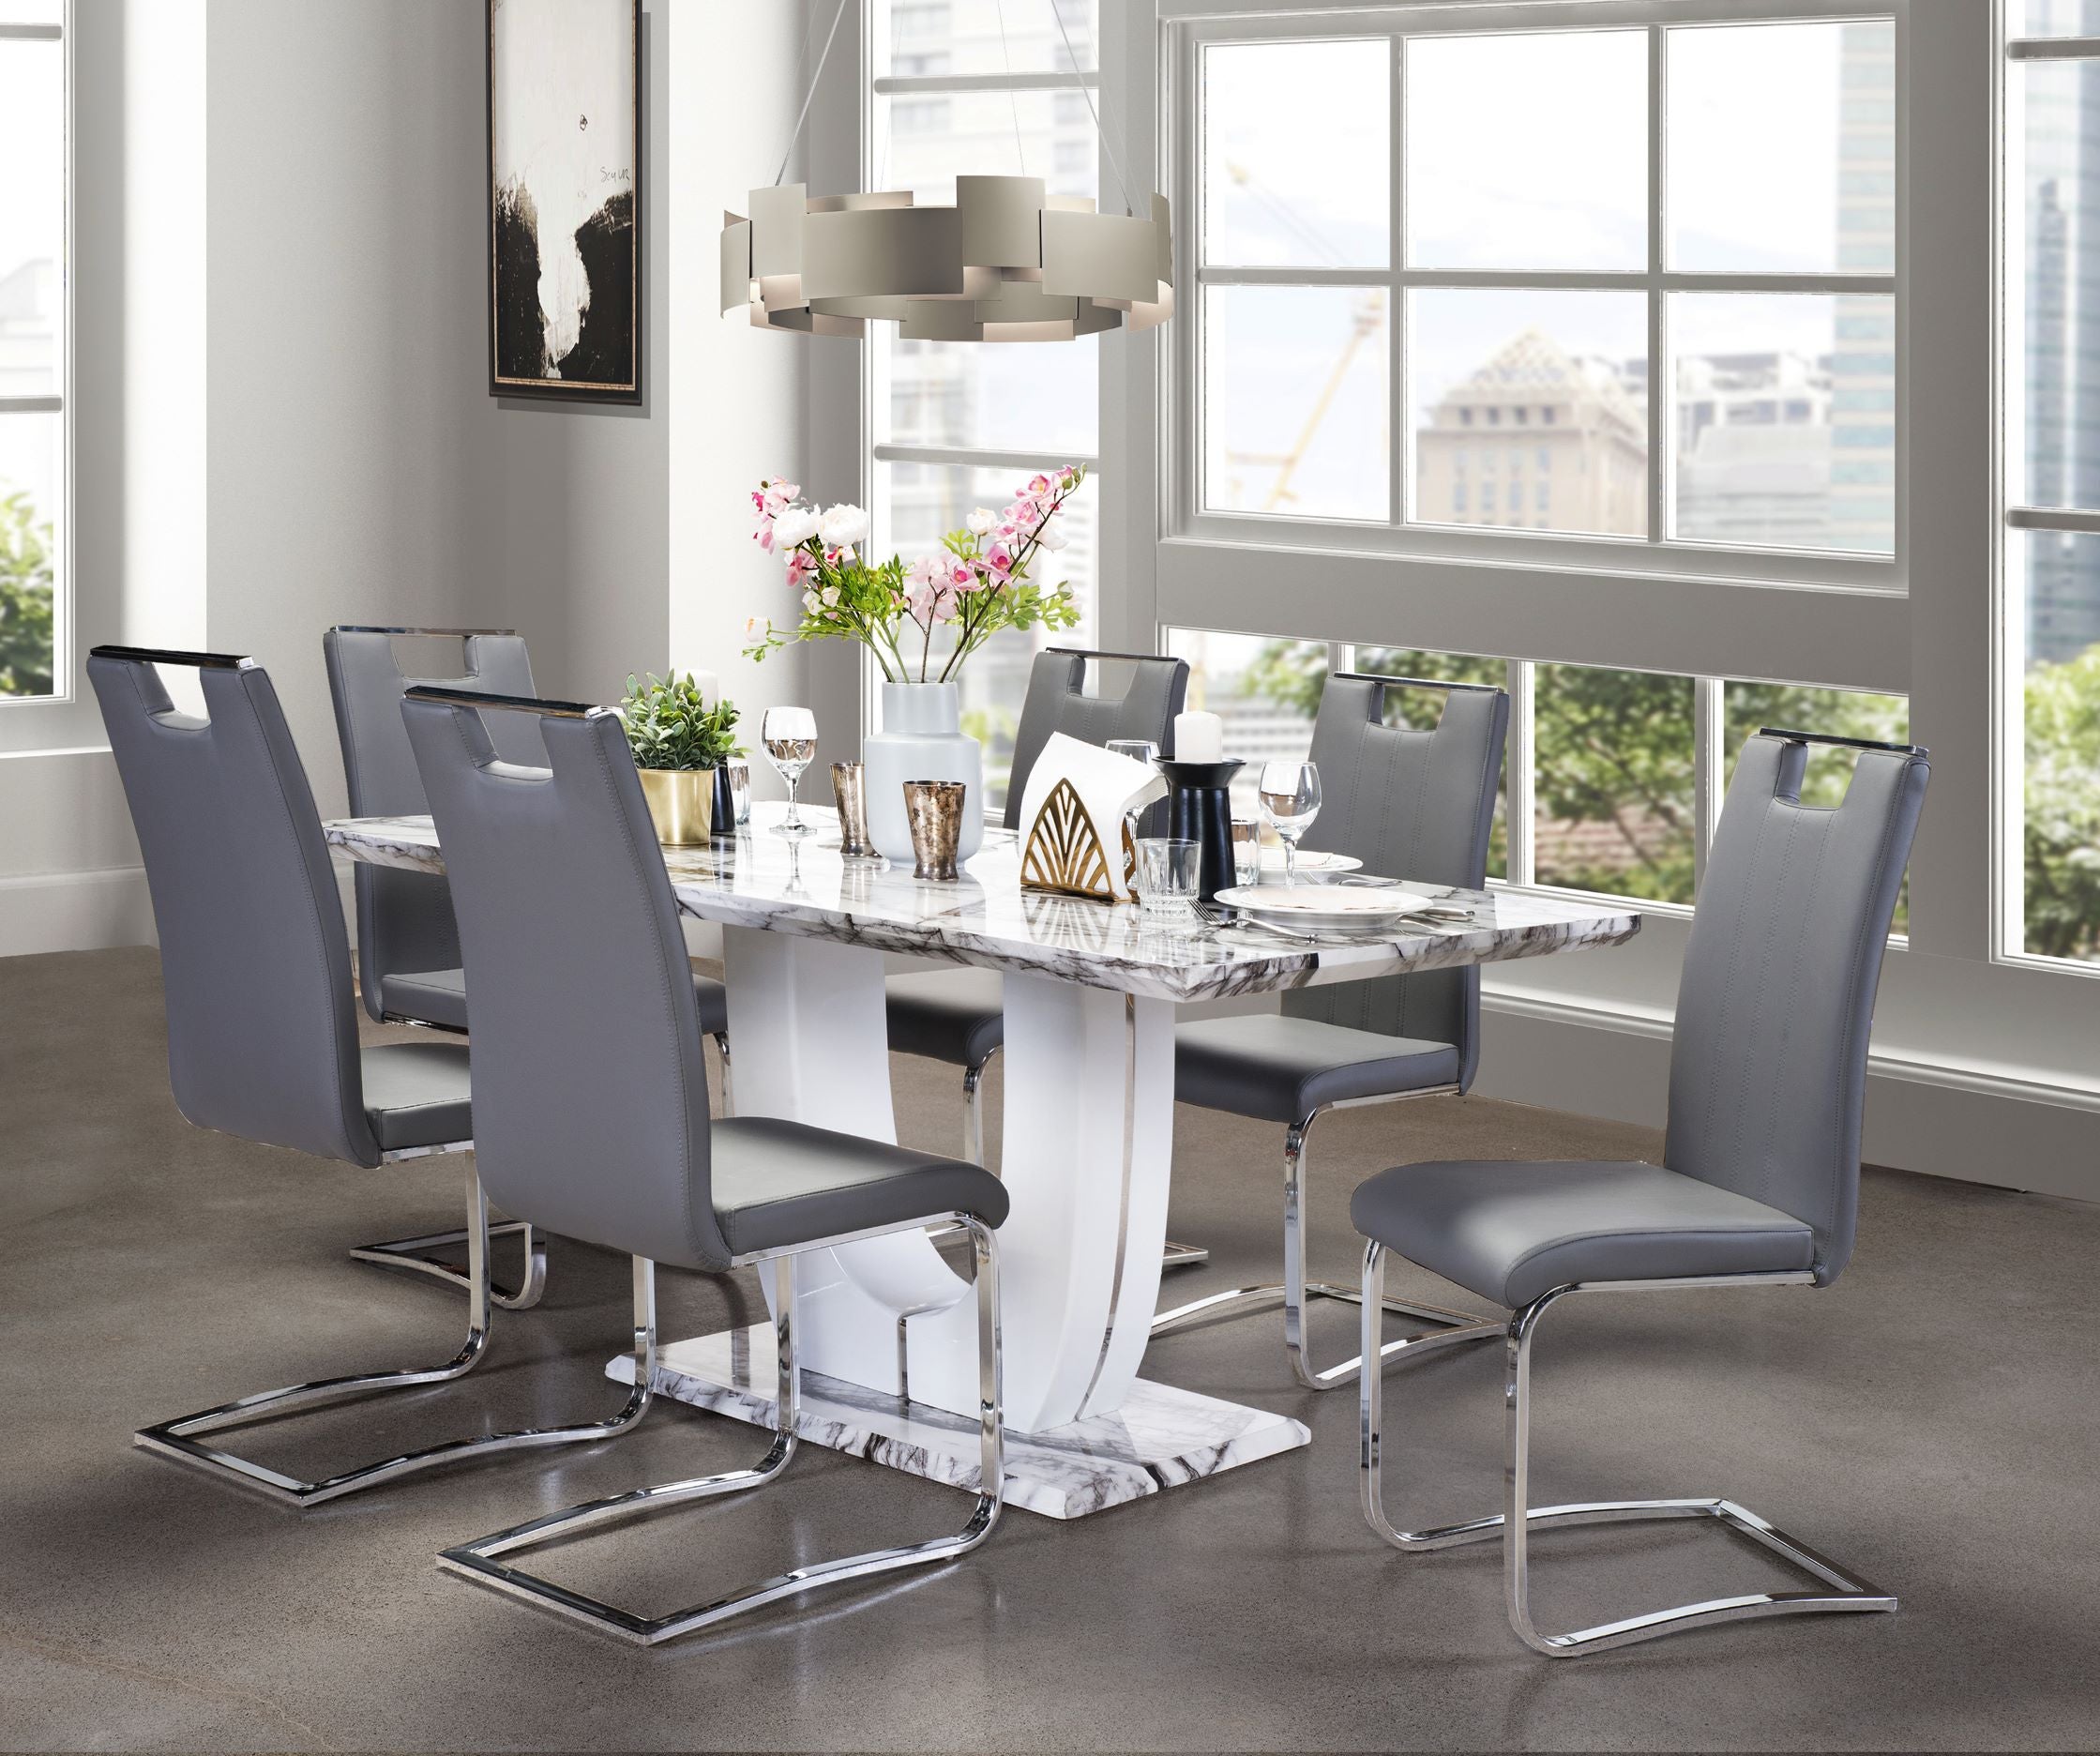 Felix Dining Table with Baxter Grey Chair Dining Collection 7409/738S4